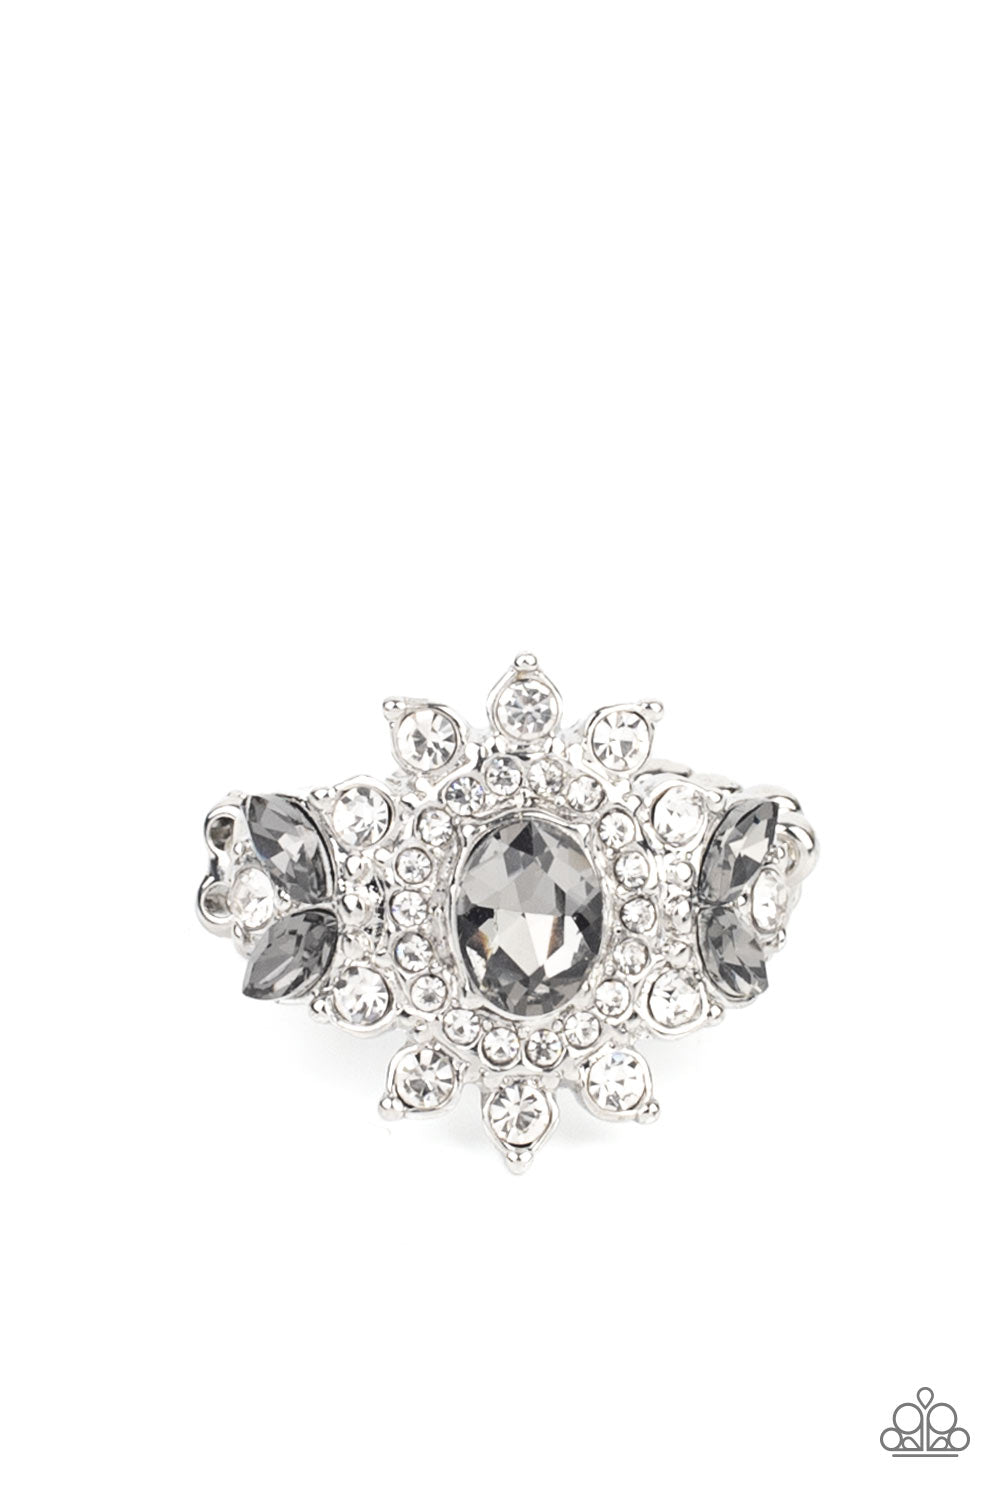 The Princess and The FROND - Silver Ring - Princess Glam Shop